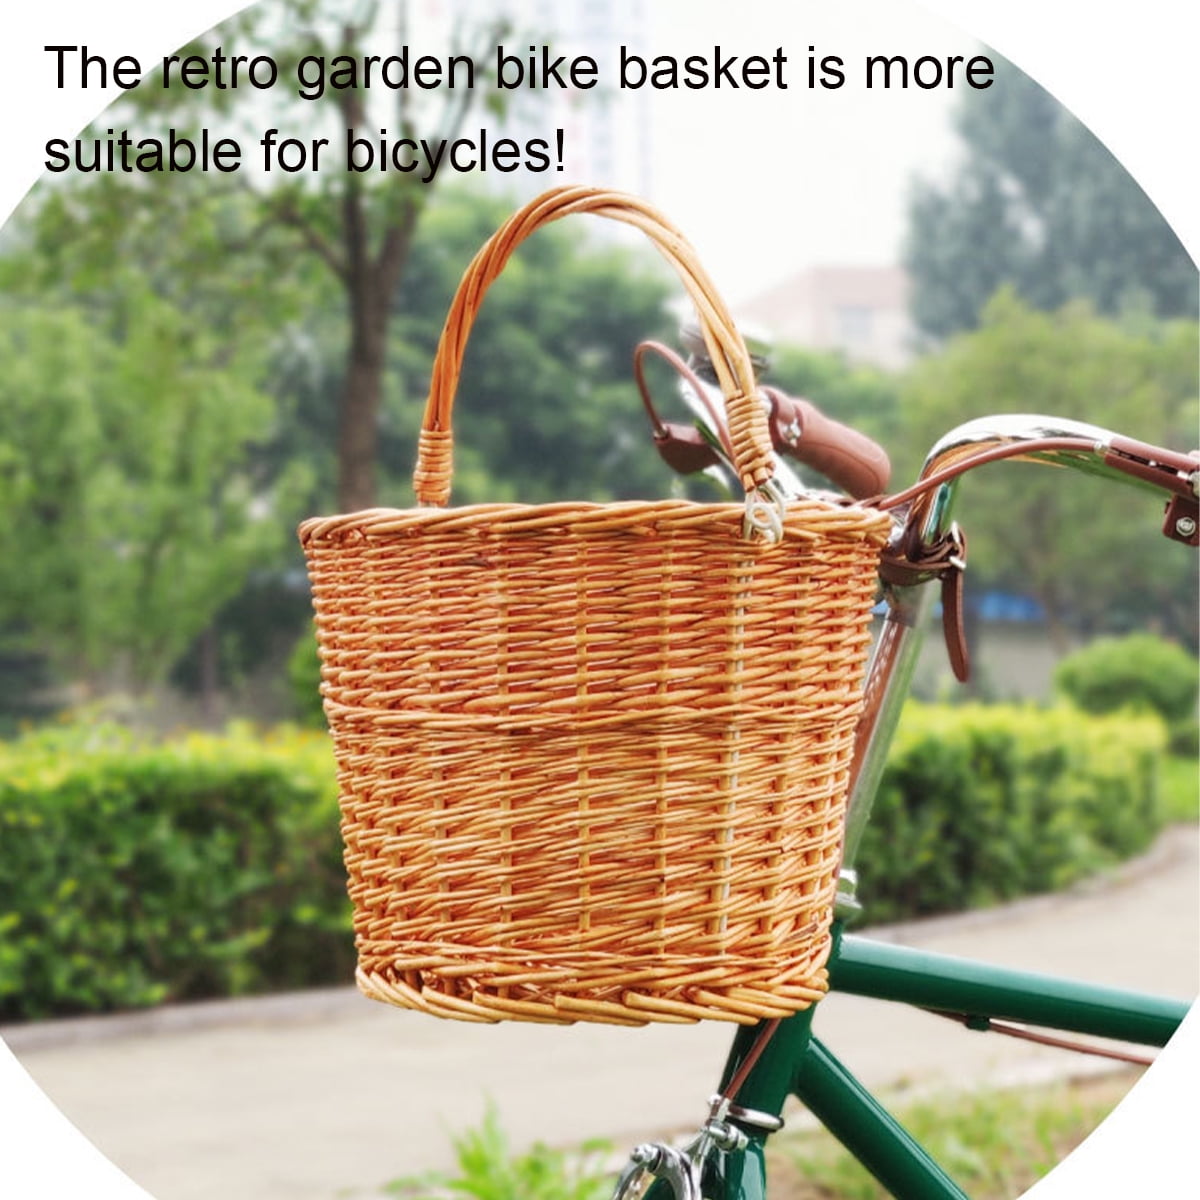 Front Handlebar Rattan Basket Vintage Wicker Bicycle Basket with Tan Leather Straps LIUSHUI Wicker Bike Basket for Small Dogs Cats Pet Carrier Bicycle Front Basket with Wire Mesh Cover Wood Color 